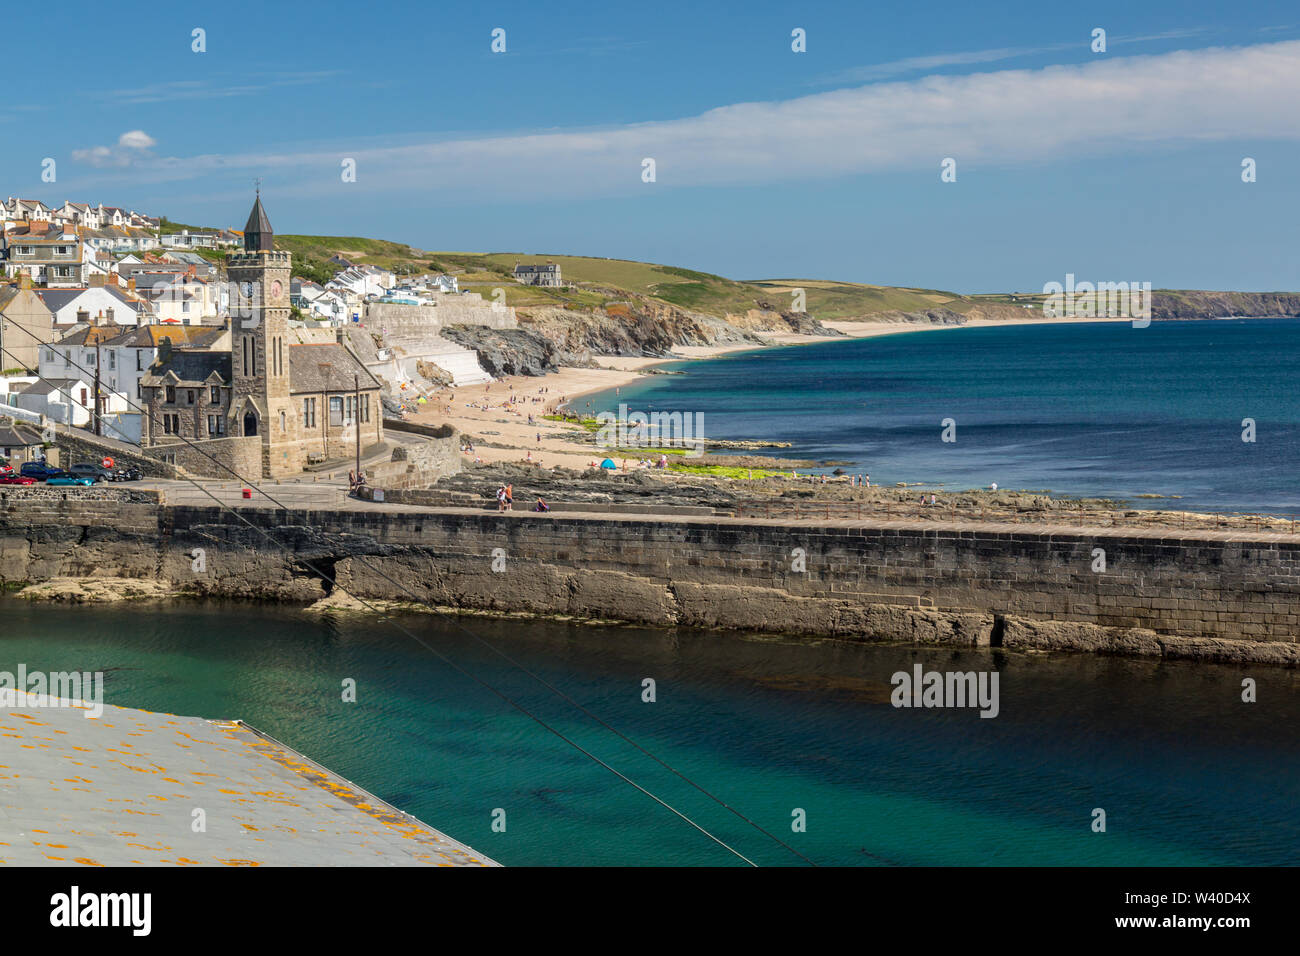 The seaside harbour village of Porthleven in Cornwall, England, showing the harbour wall and church. Stock Photo